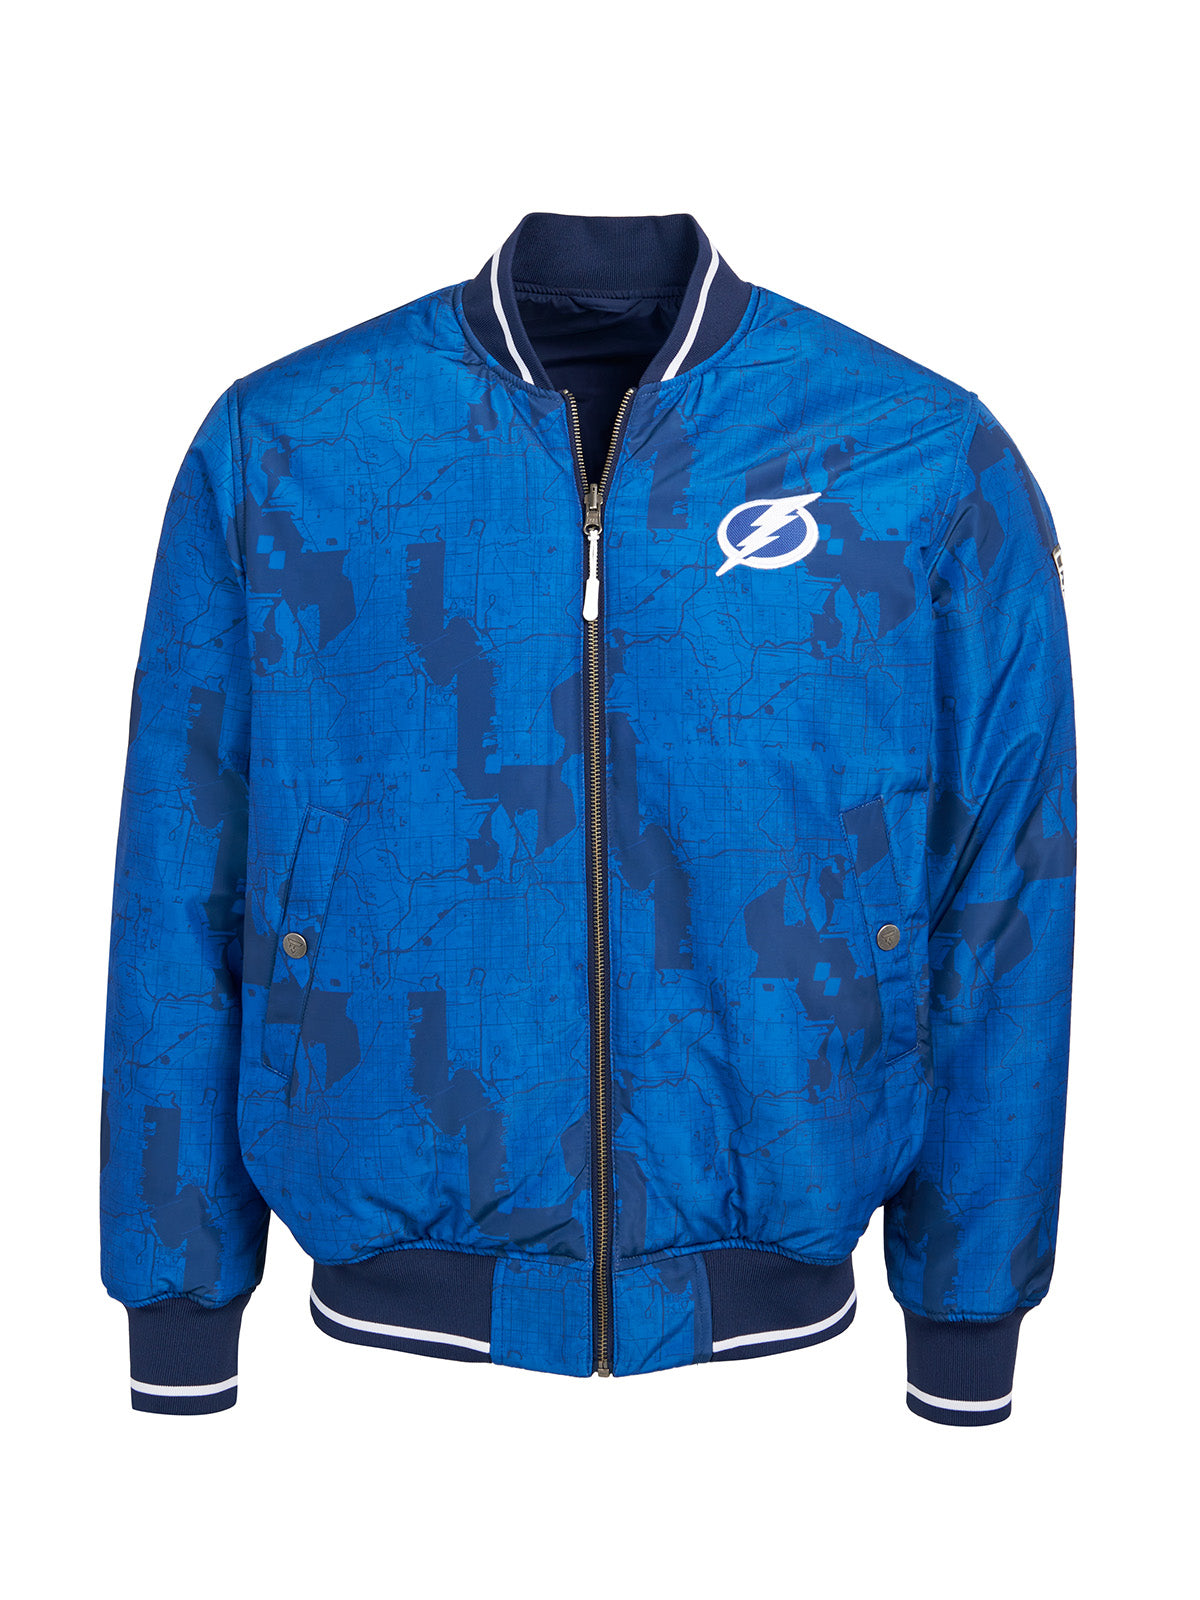 Tampa Bay Lightning Bomber - Reversible bomber jacket featuring the iconic Tampa Bay Lightning logo with ribbed cuffs, collar and hem in the team colors